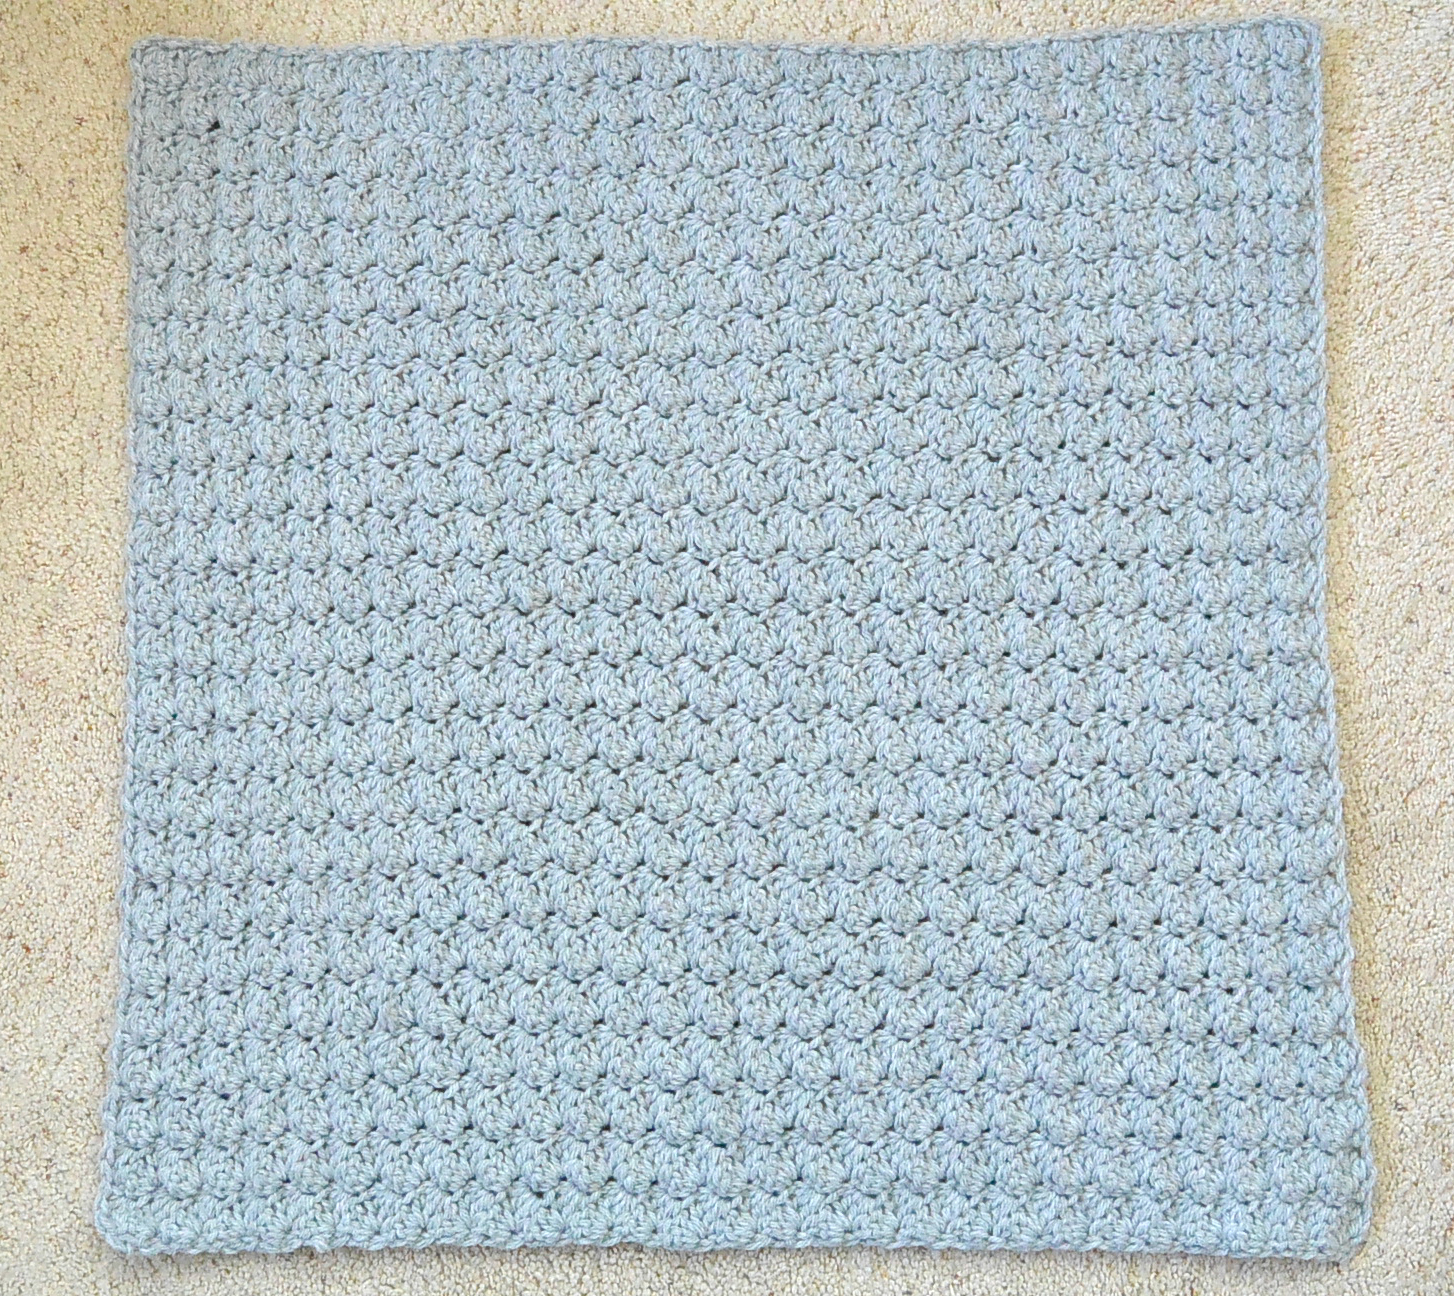 Crochet Blanket Pattern For Beginners Simple Crocheted Blanket Go To Pattern Mama In A Stitch